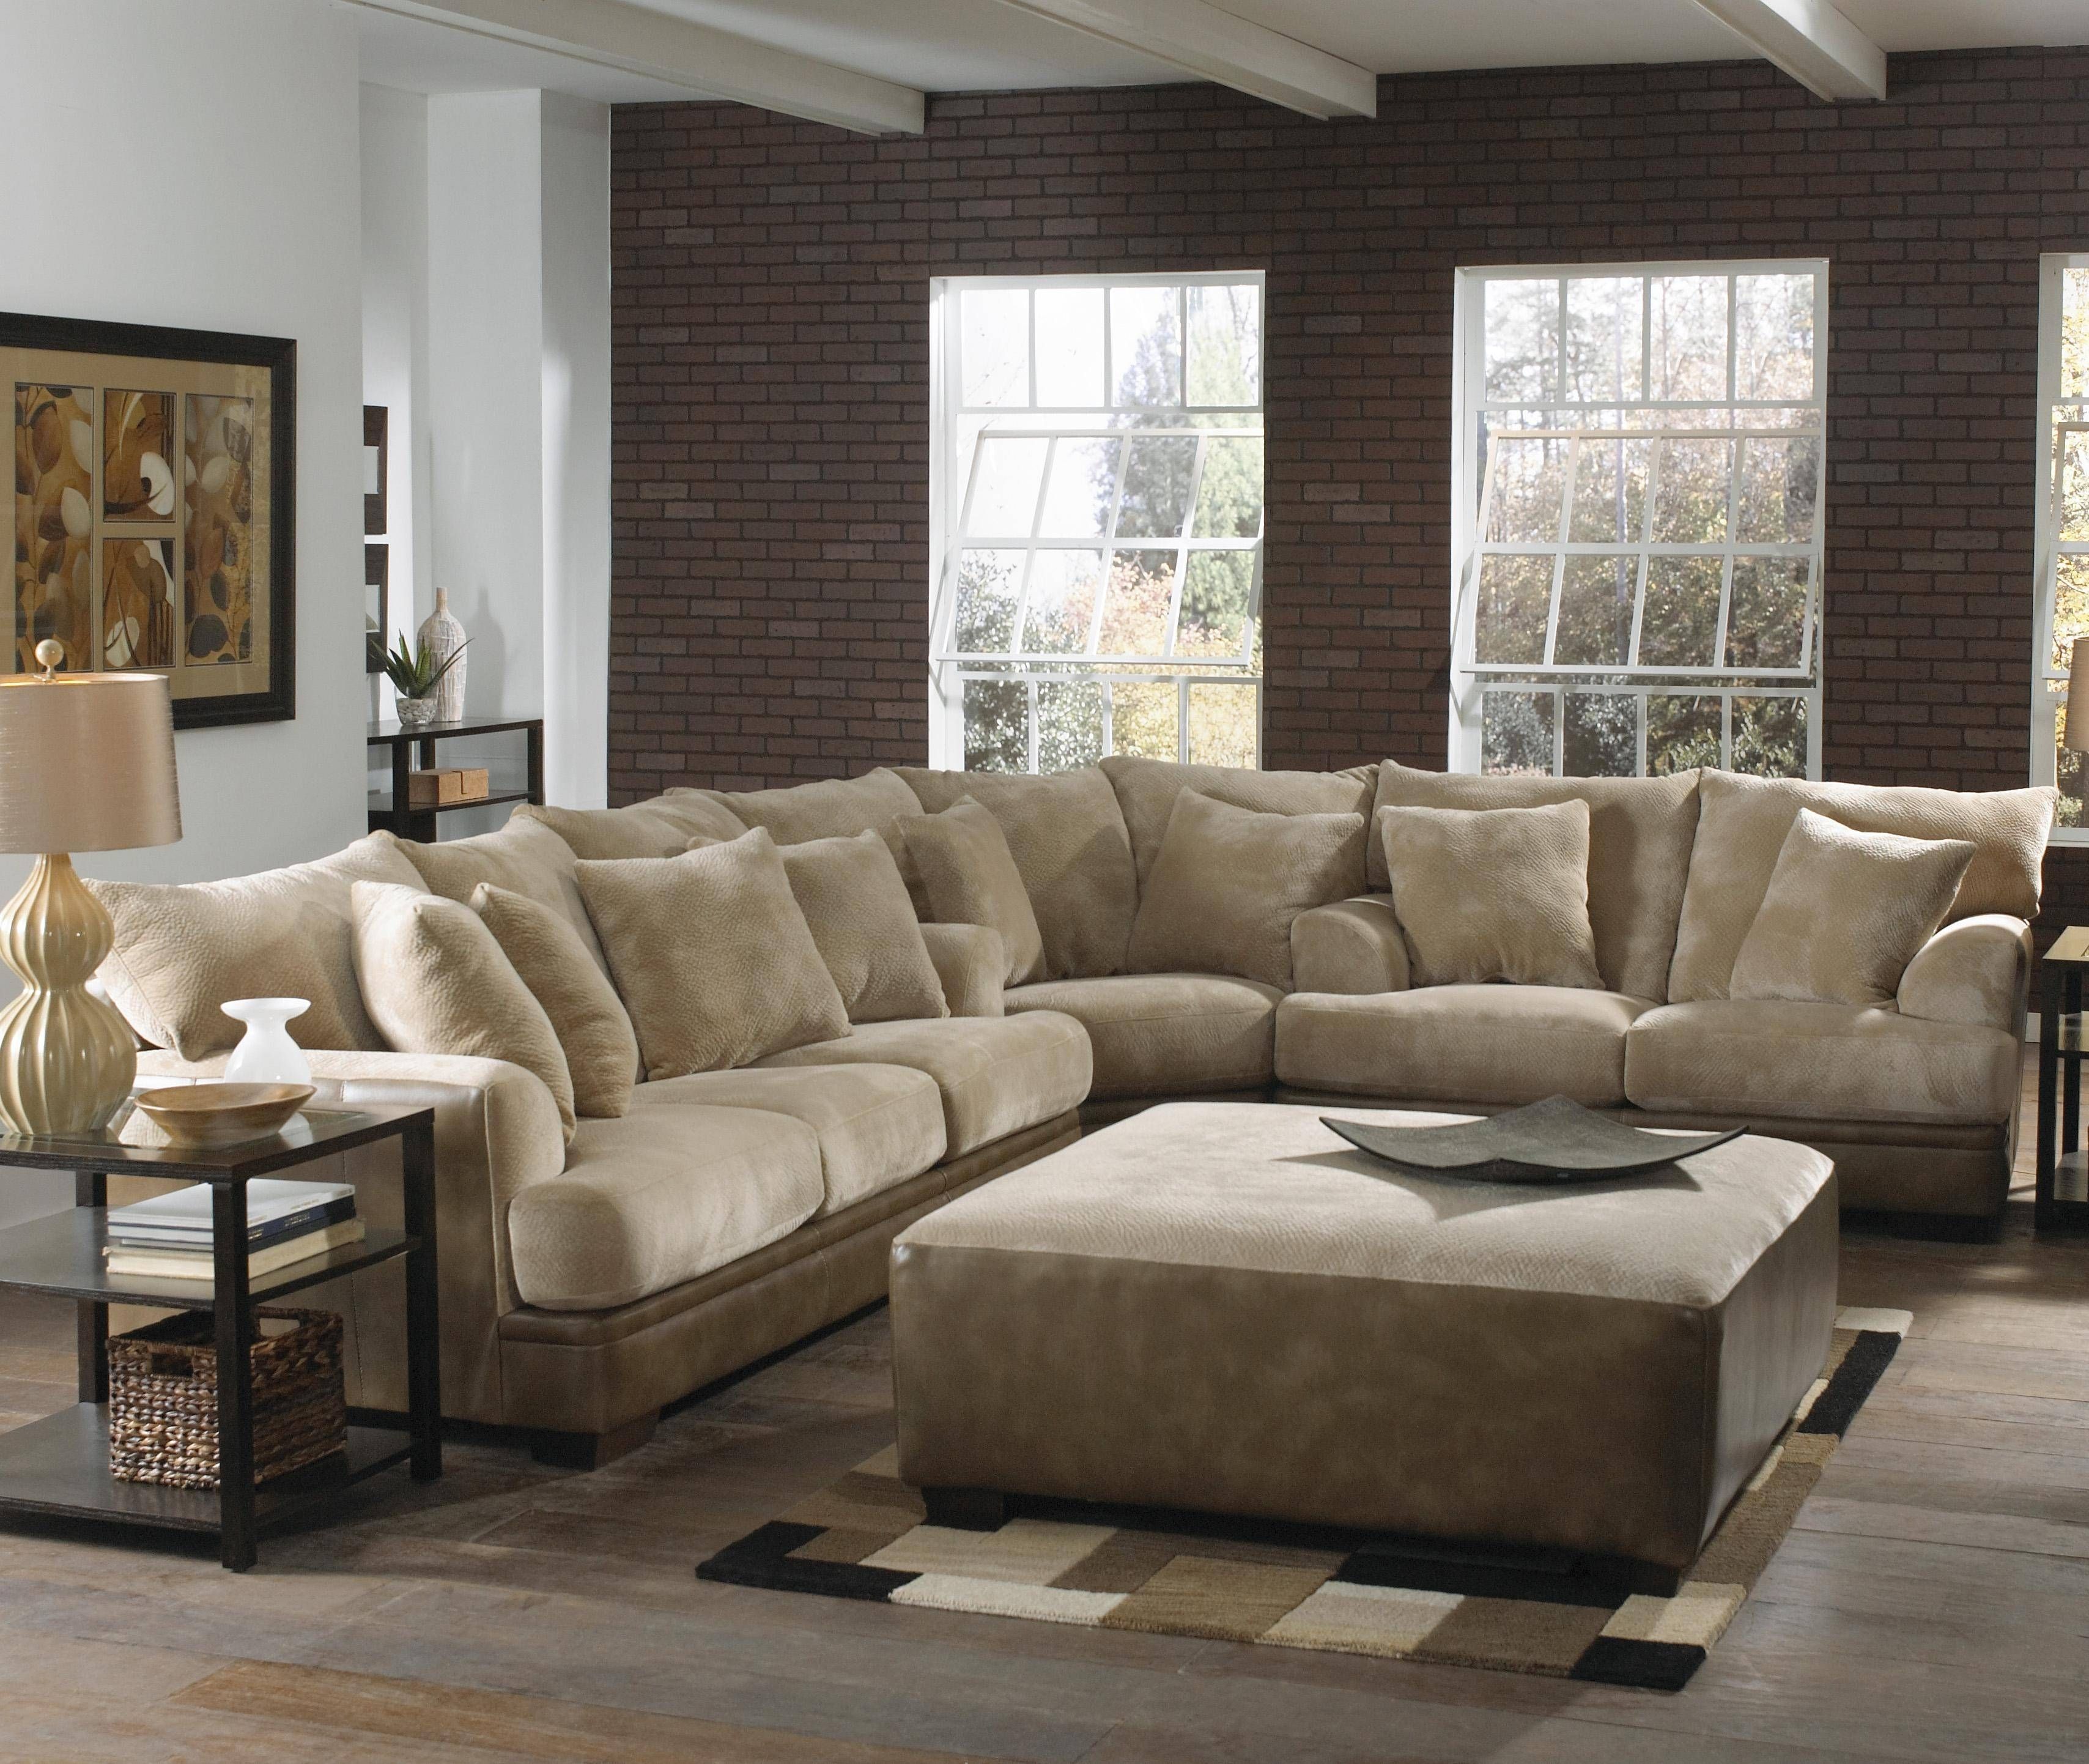 12 Inspirations Of European Style Sectional Sofas Within European Style Sectional Sofas (View 7 of 30)